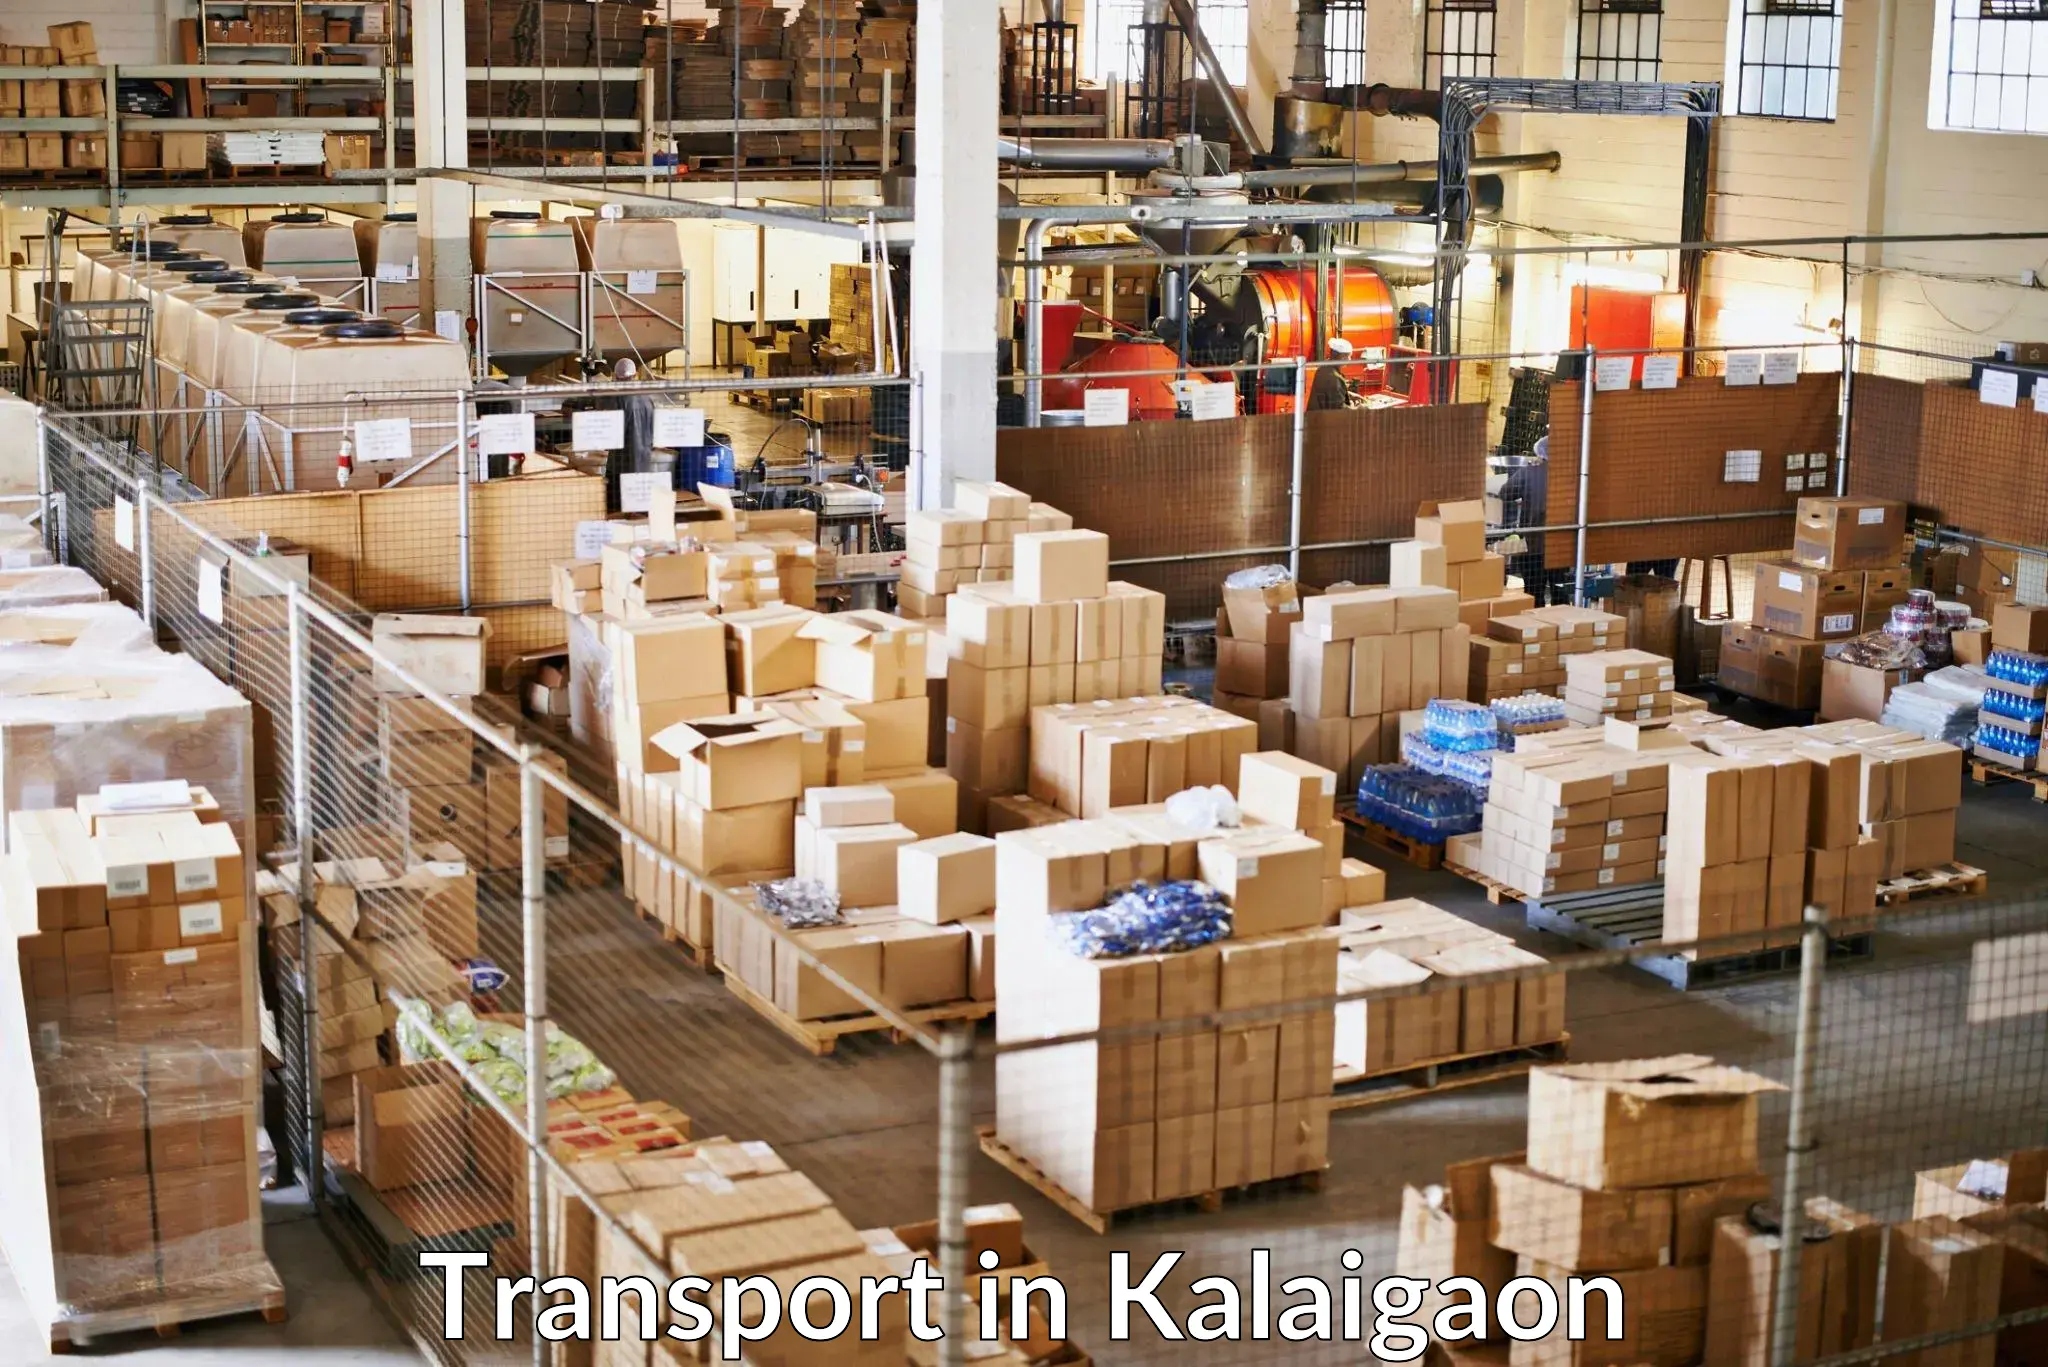 Domestic transport services in Kalaigaon